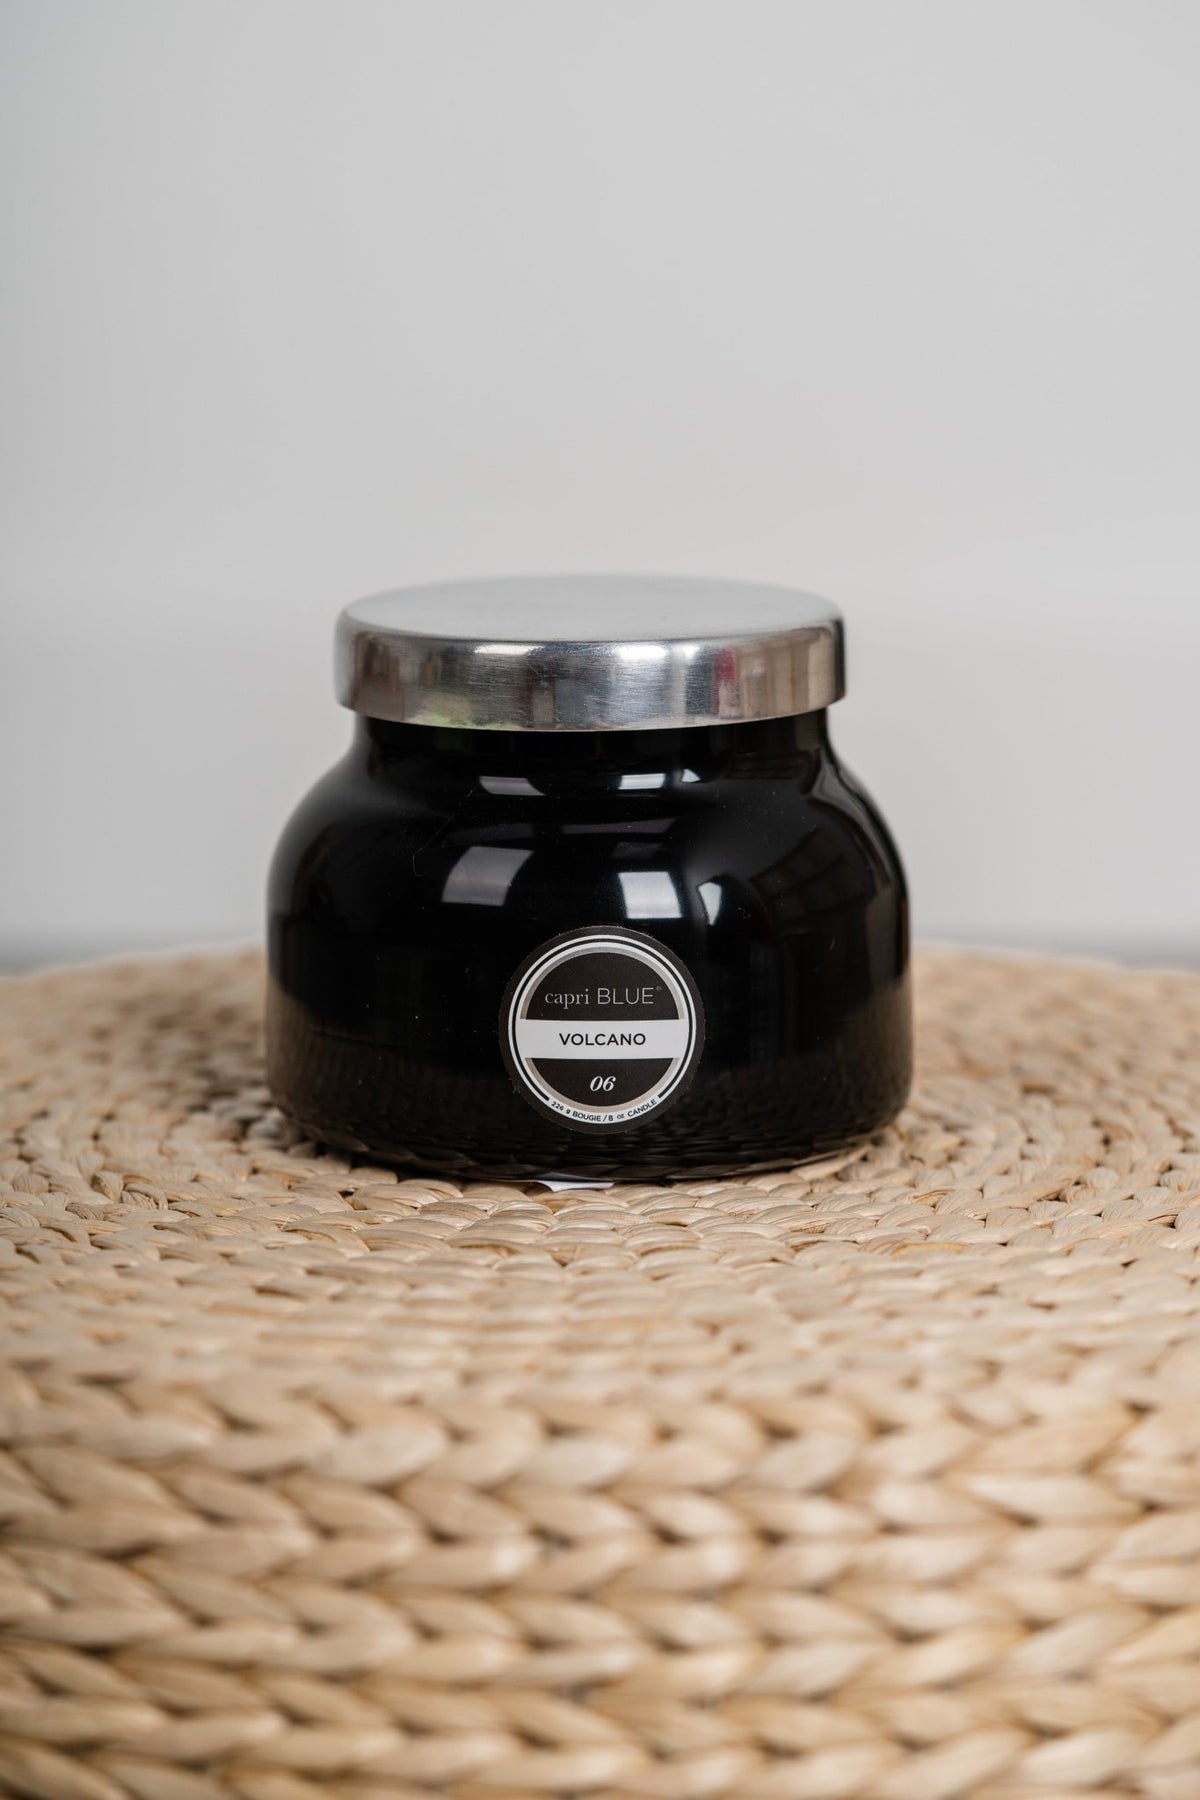 Capri Blue volcano 8 oz petite candle black - Trendy Candles and Scents at Lush Fashion Lounge Boutique in Oklahoma City